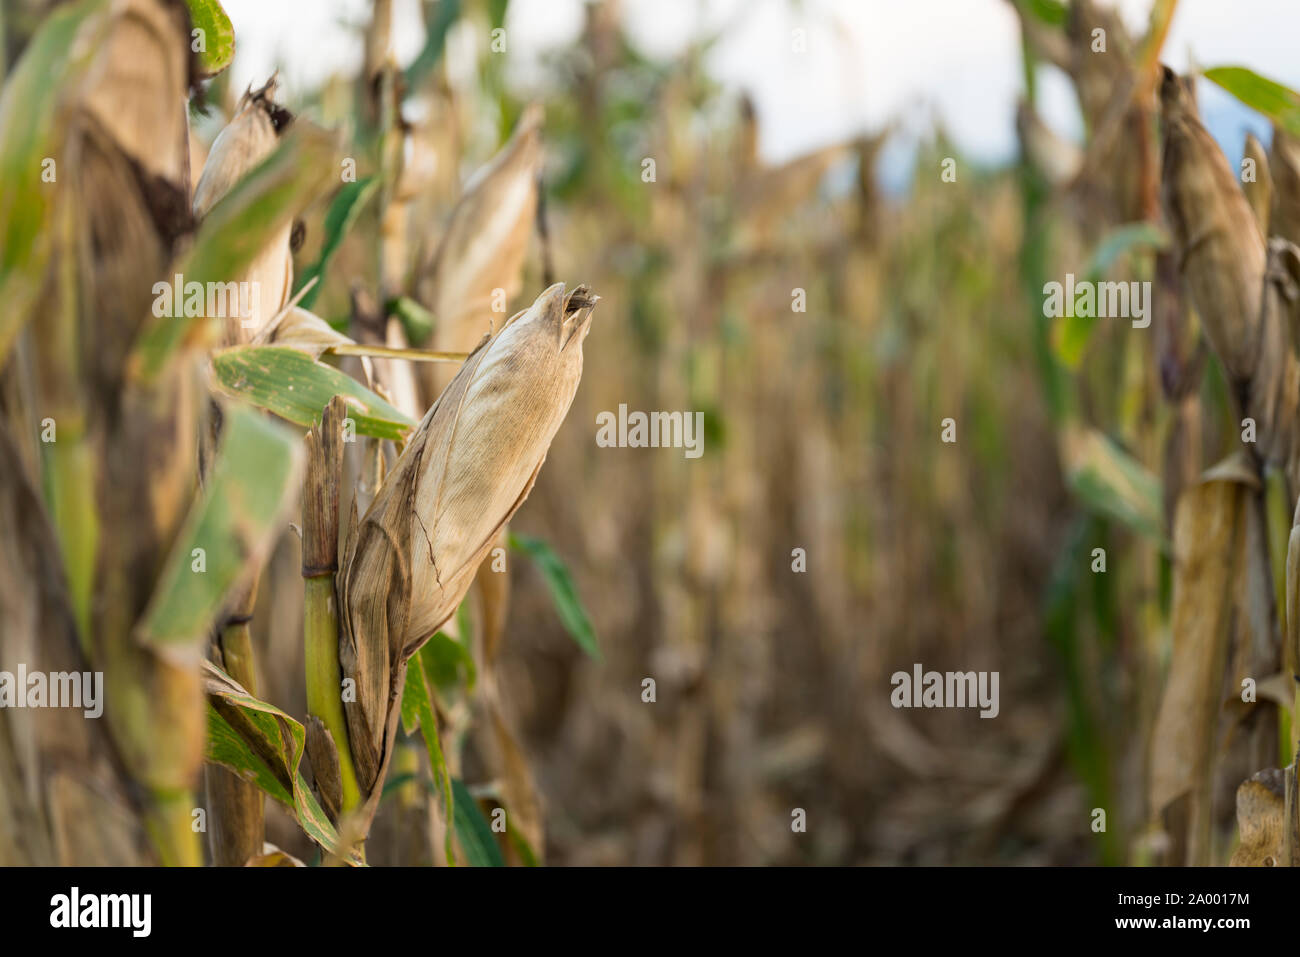 Corn in maize fields awaiting harvest in the dry season. Stock Photo